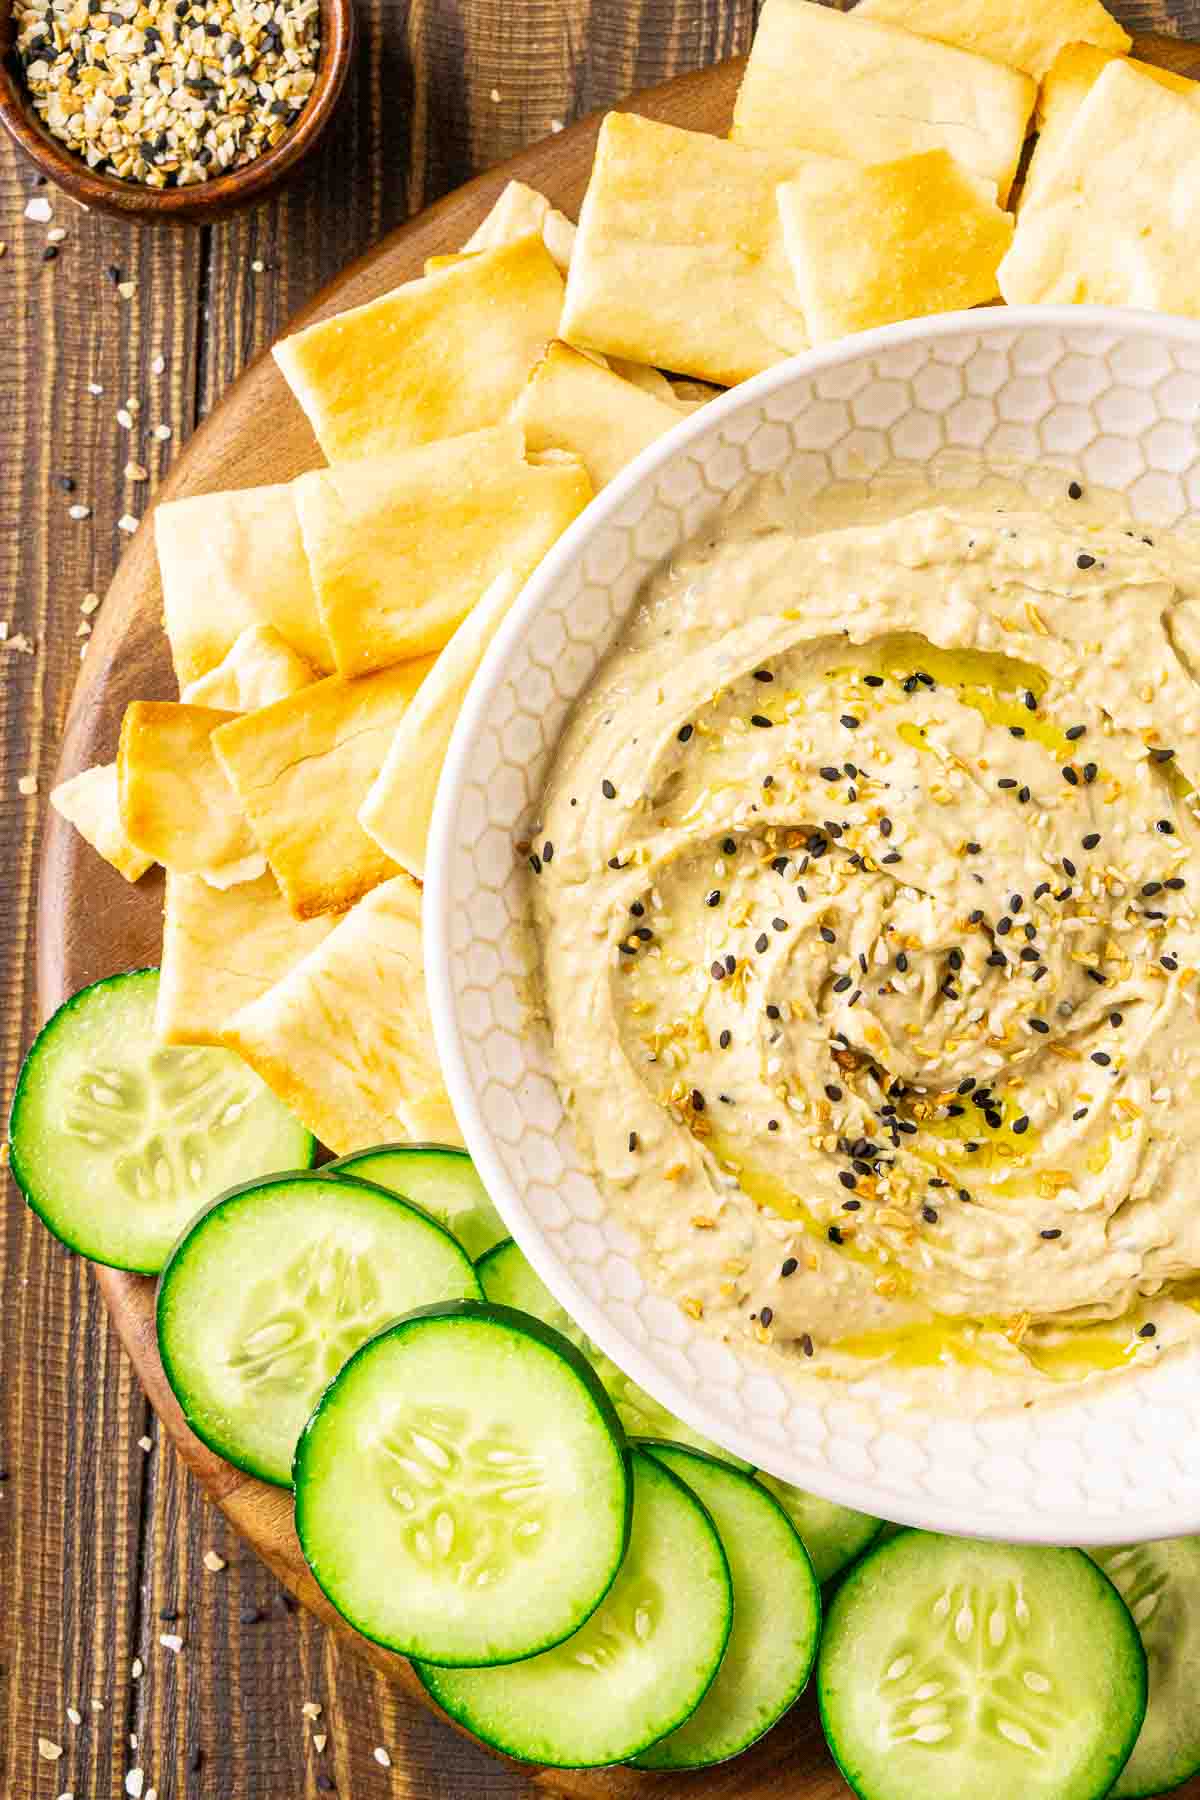 An aerial view of a bowl of everything bagel hummus in a cream-colored bowl on a wooden surface with cucumbers and pita chips.